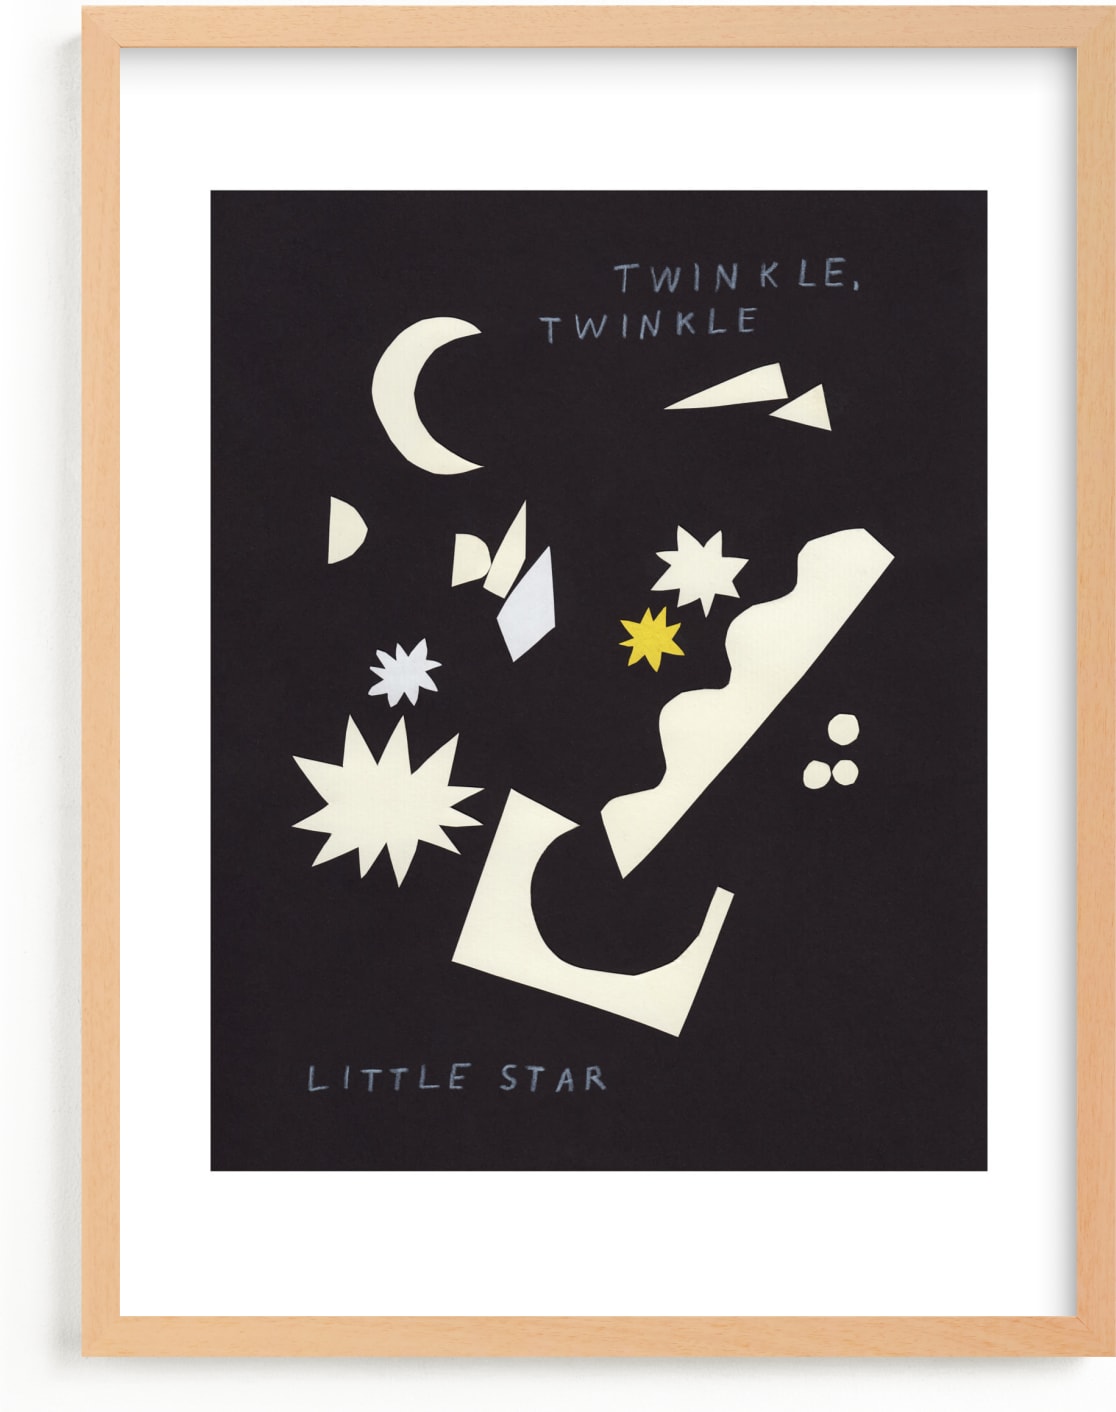 This is a black and white nursery wall art by Elliot Stokes called Twinkle, Twinkle Little Star.